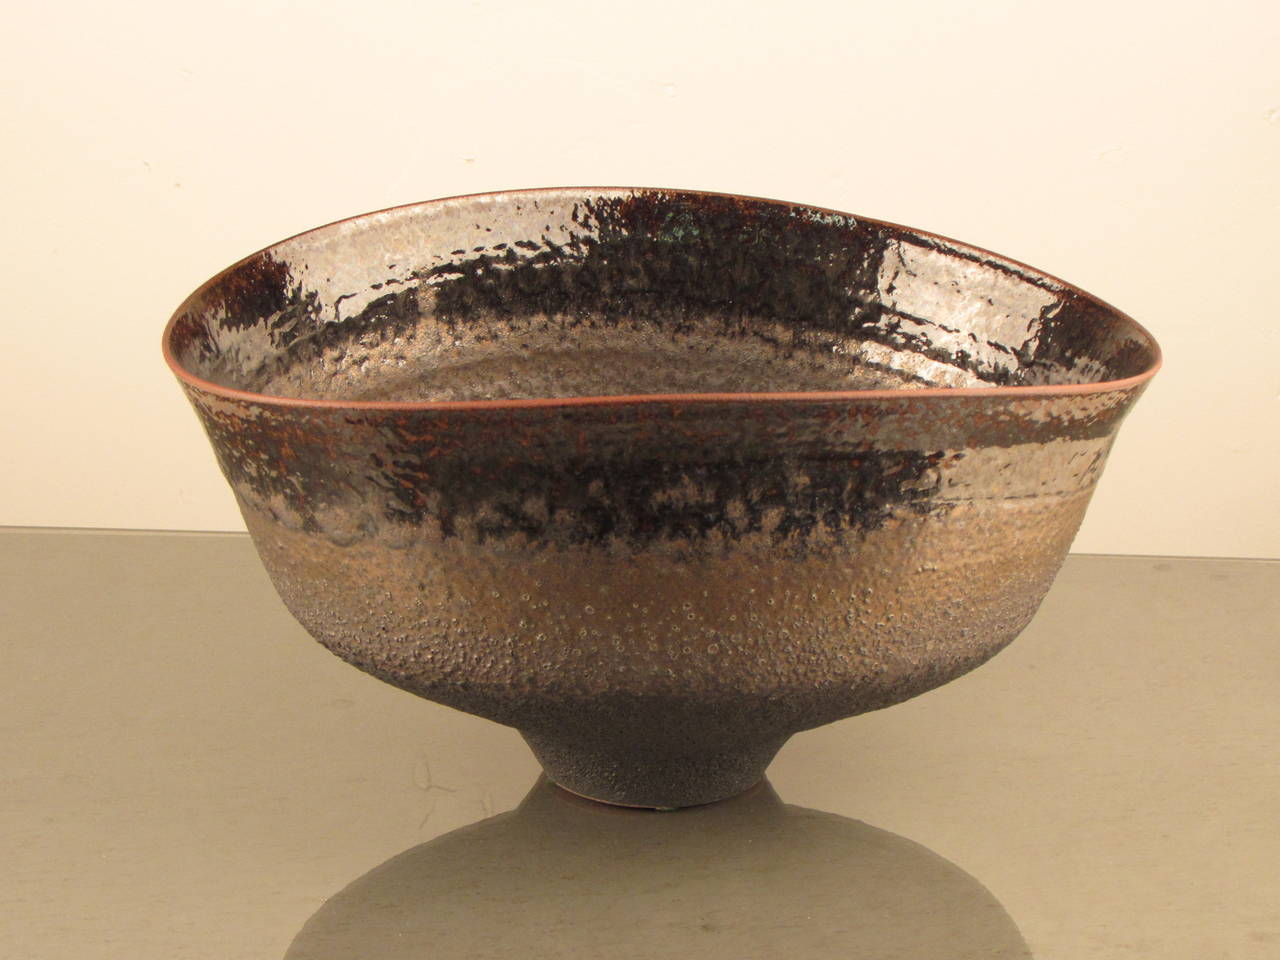 Jaw-dropping footed bowl with metallic black glaze by working studio potter, Jeremy Briddell (b.1971). Incredibly well-thrown and beautifully balanced; Briddell is a potter who excels at both skillful wheel work and a keen eye for color and form.